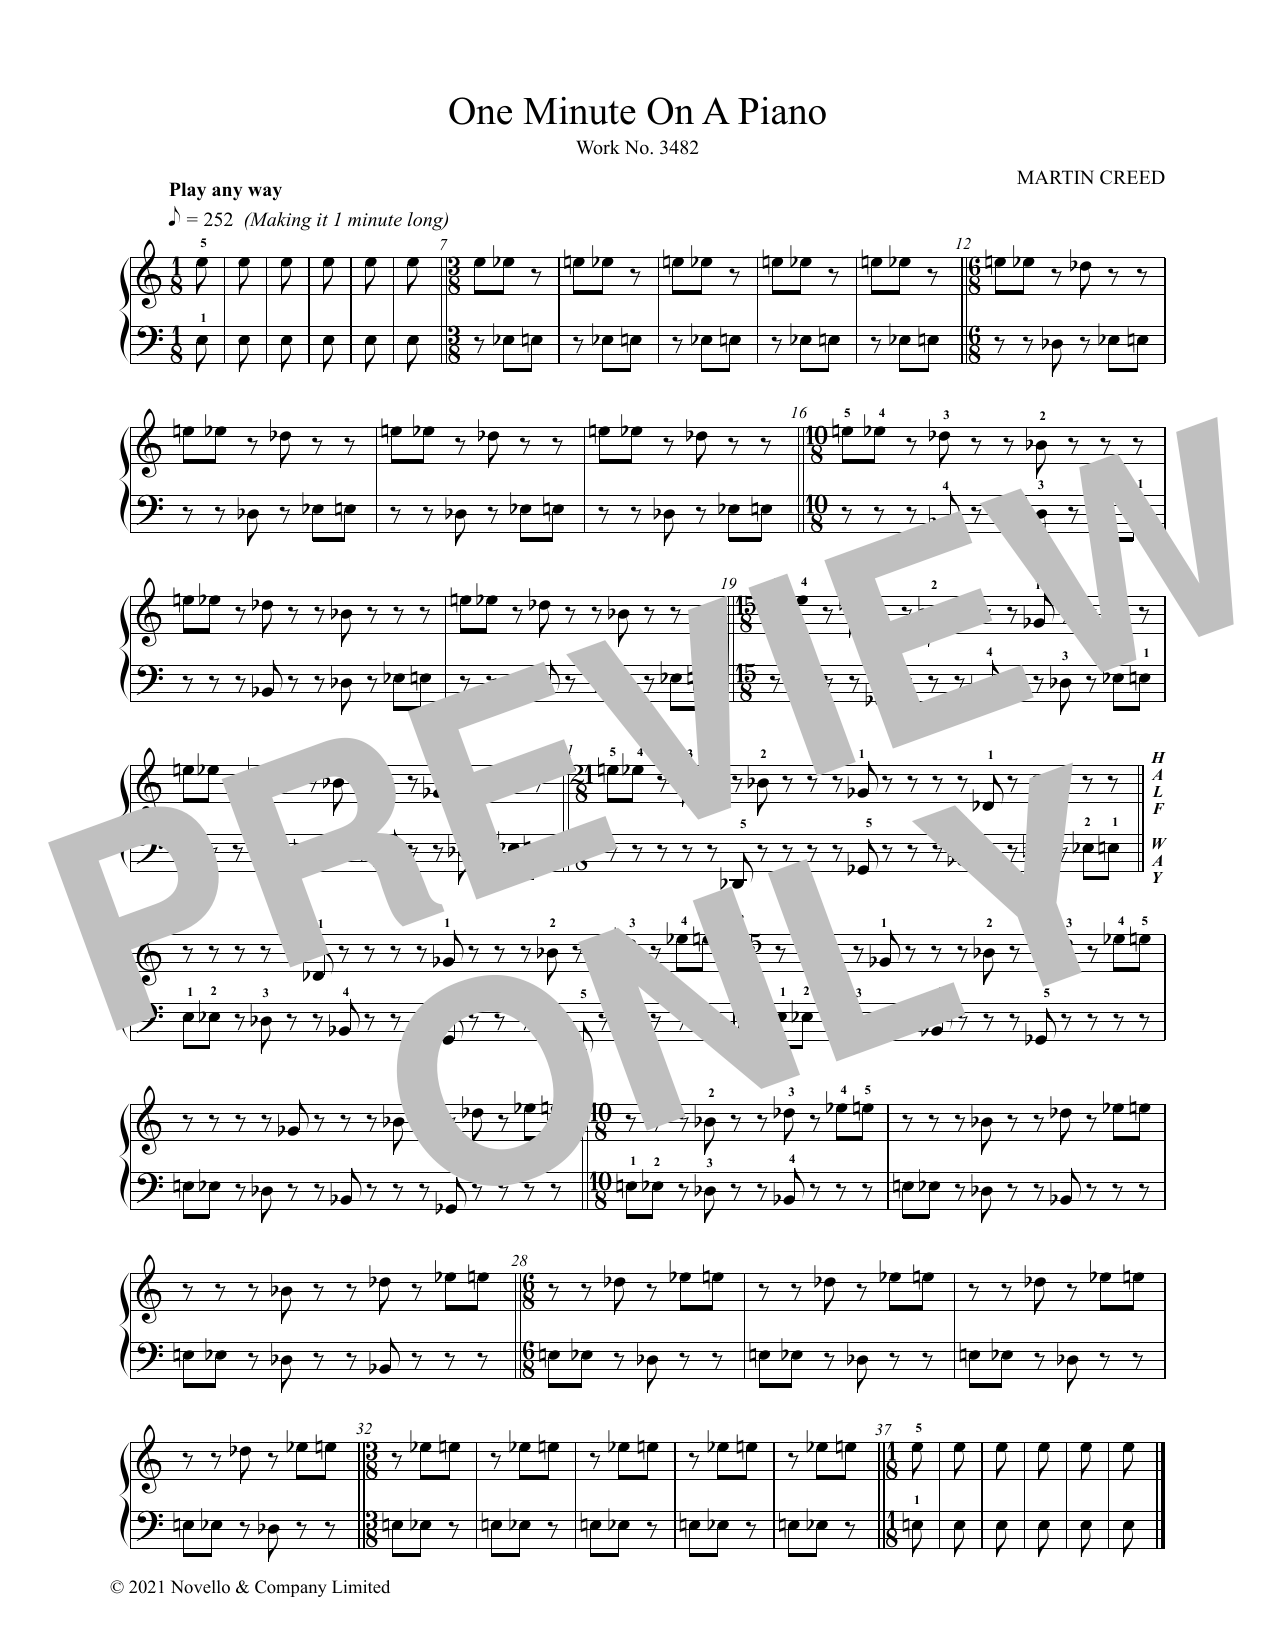 Download Martin Creed One Minute On A Piano Sheet Music